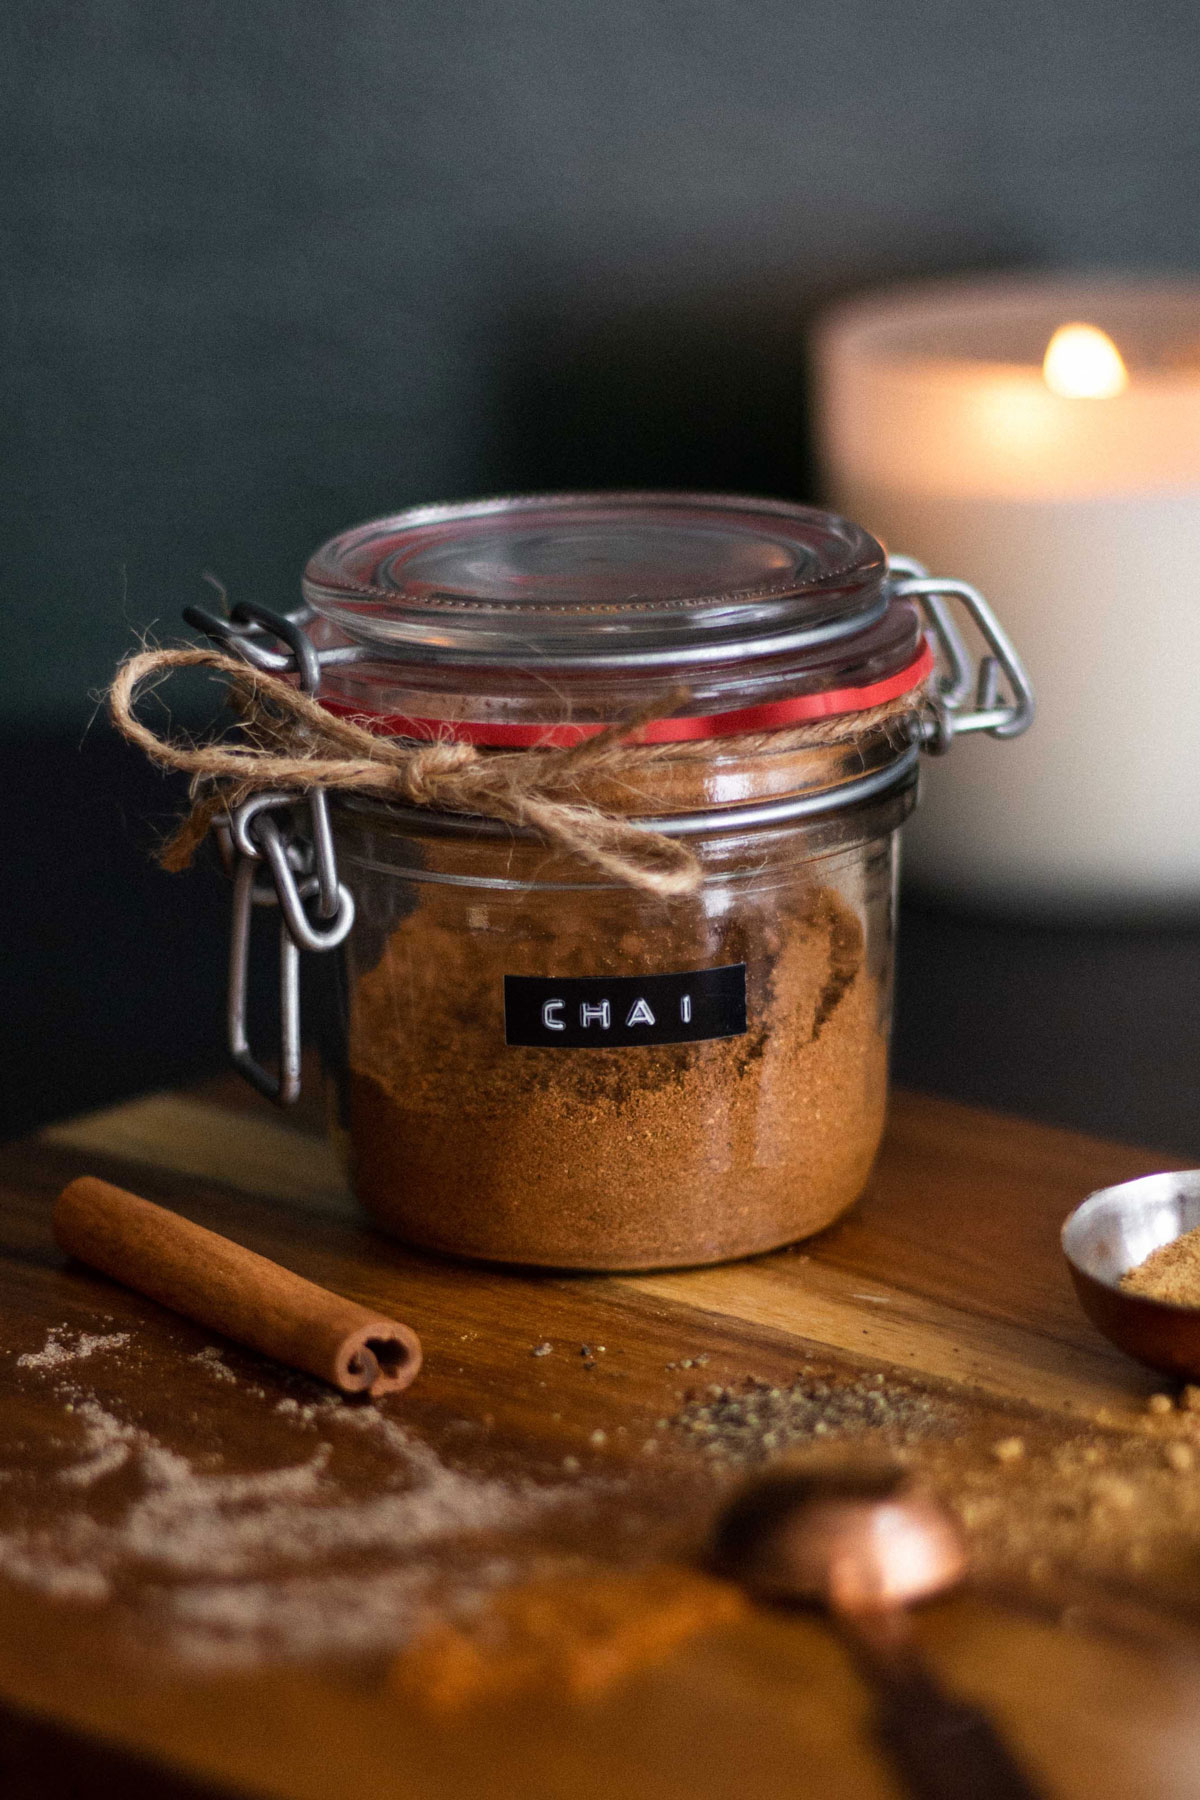 Chai is another wonderful tea blend for morning